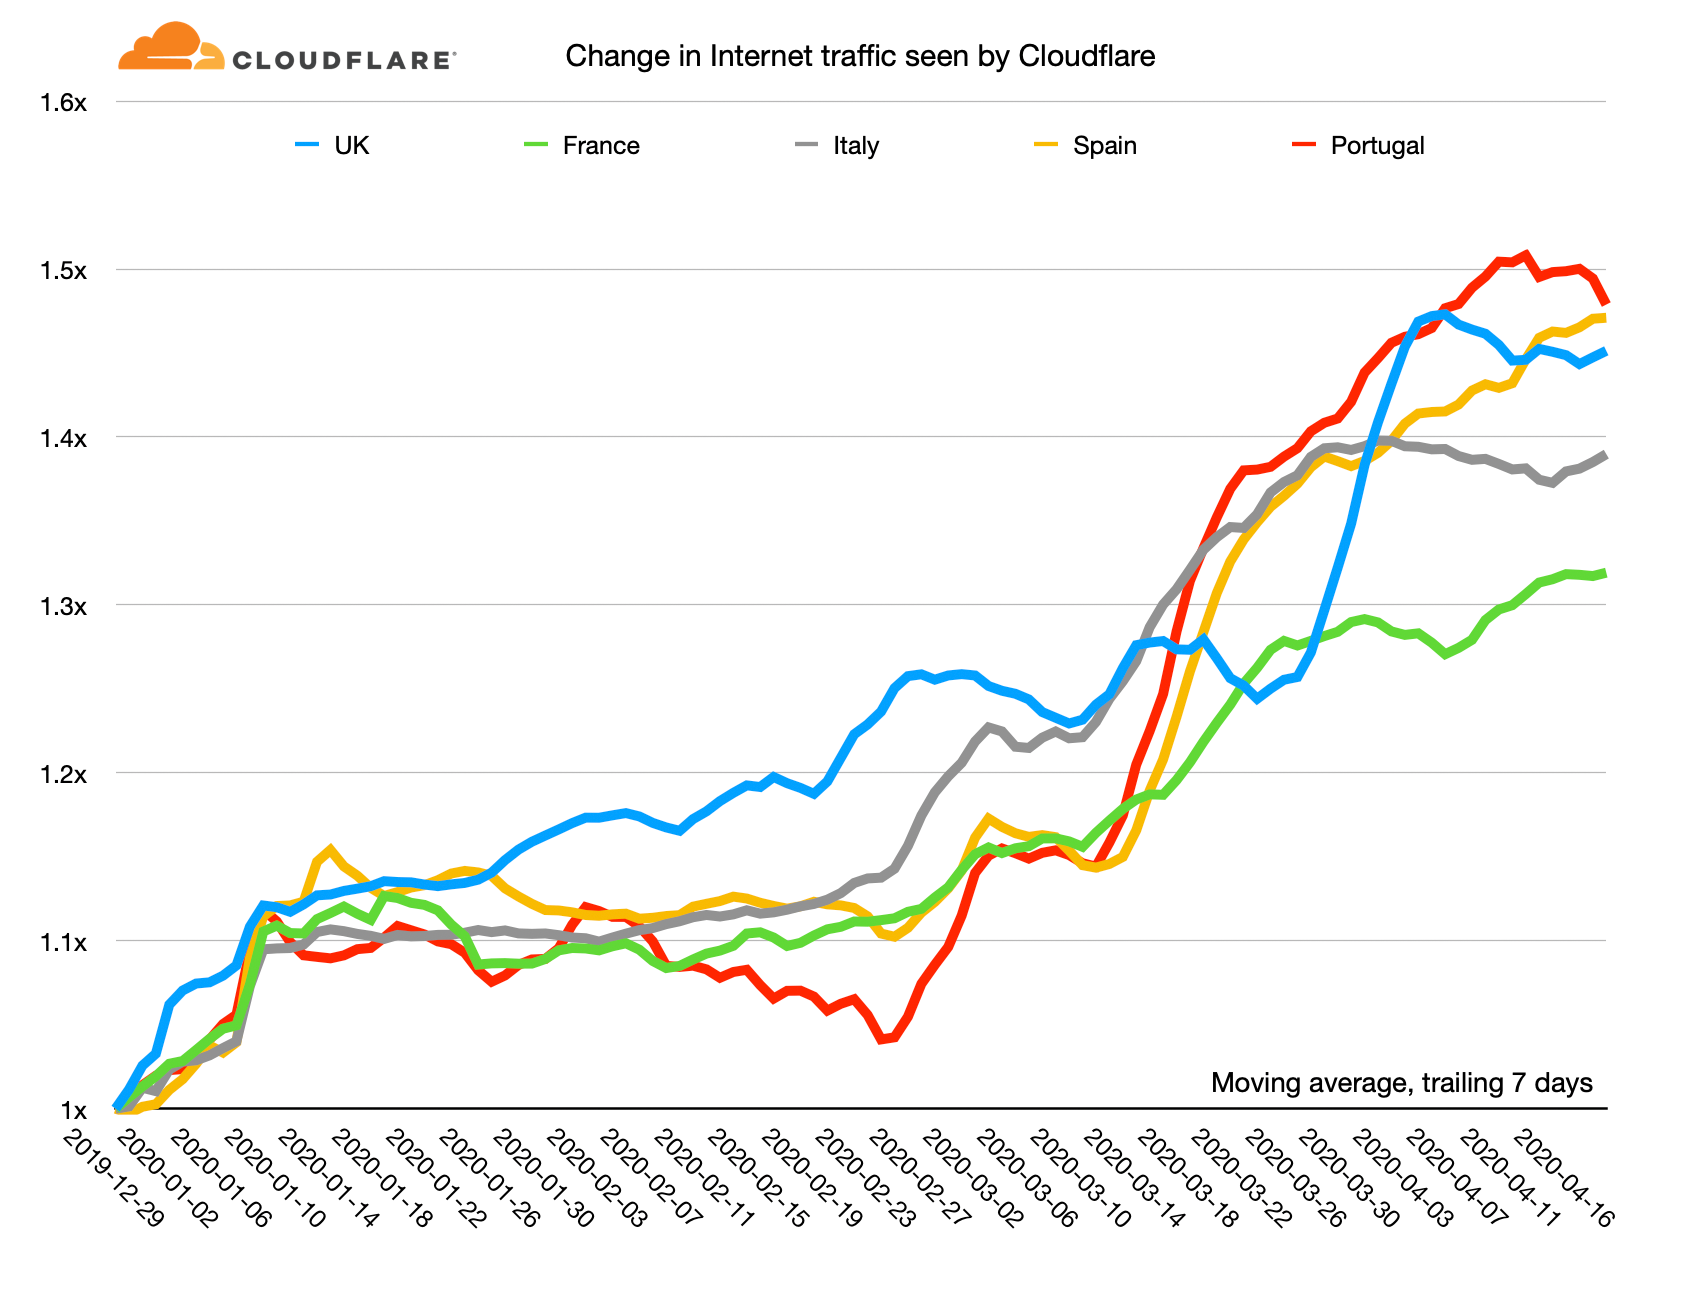 Internet outage trends during Covid-19 pandemic